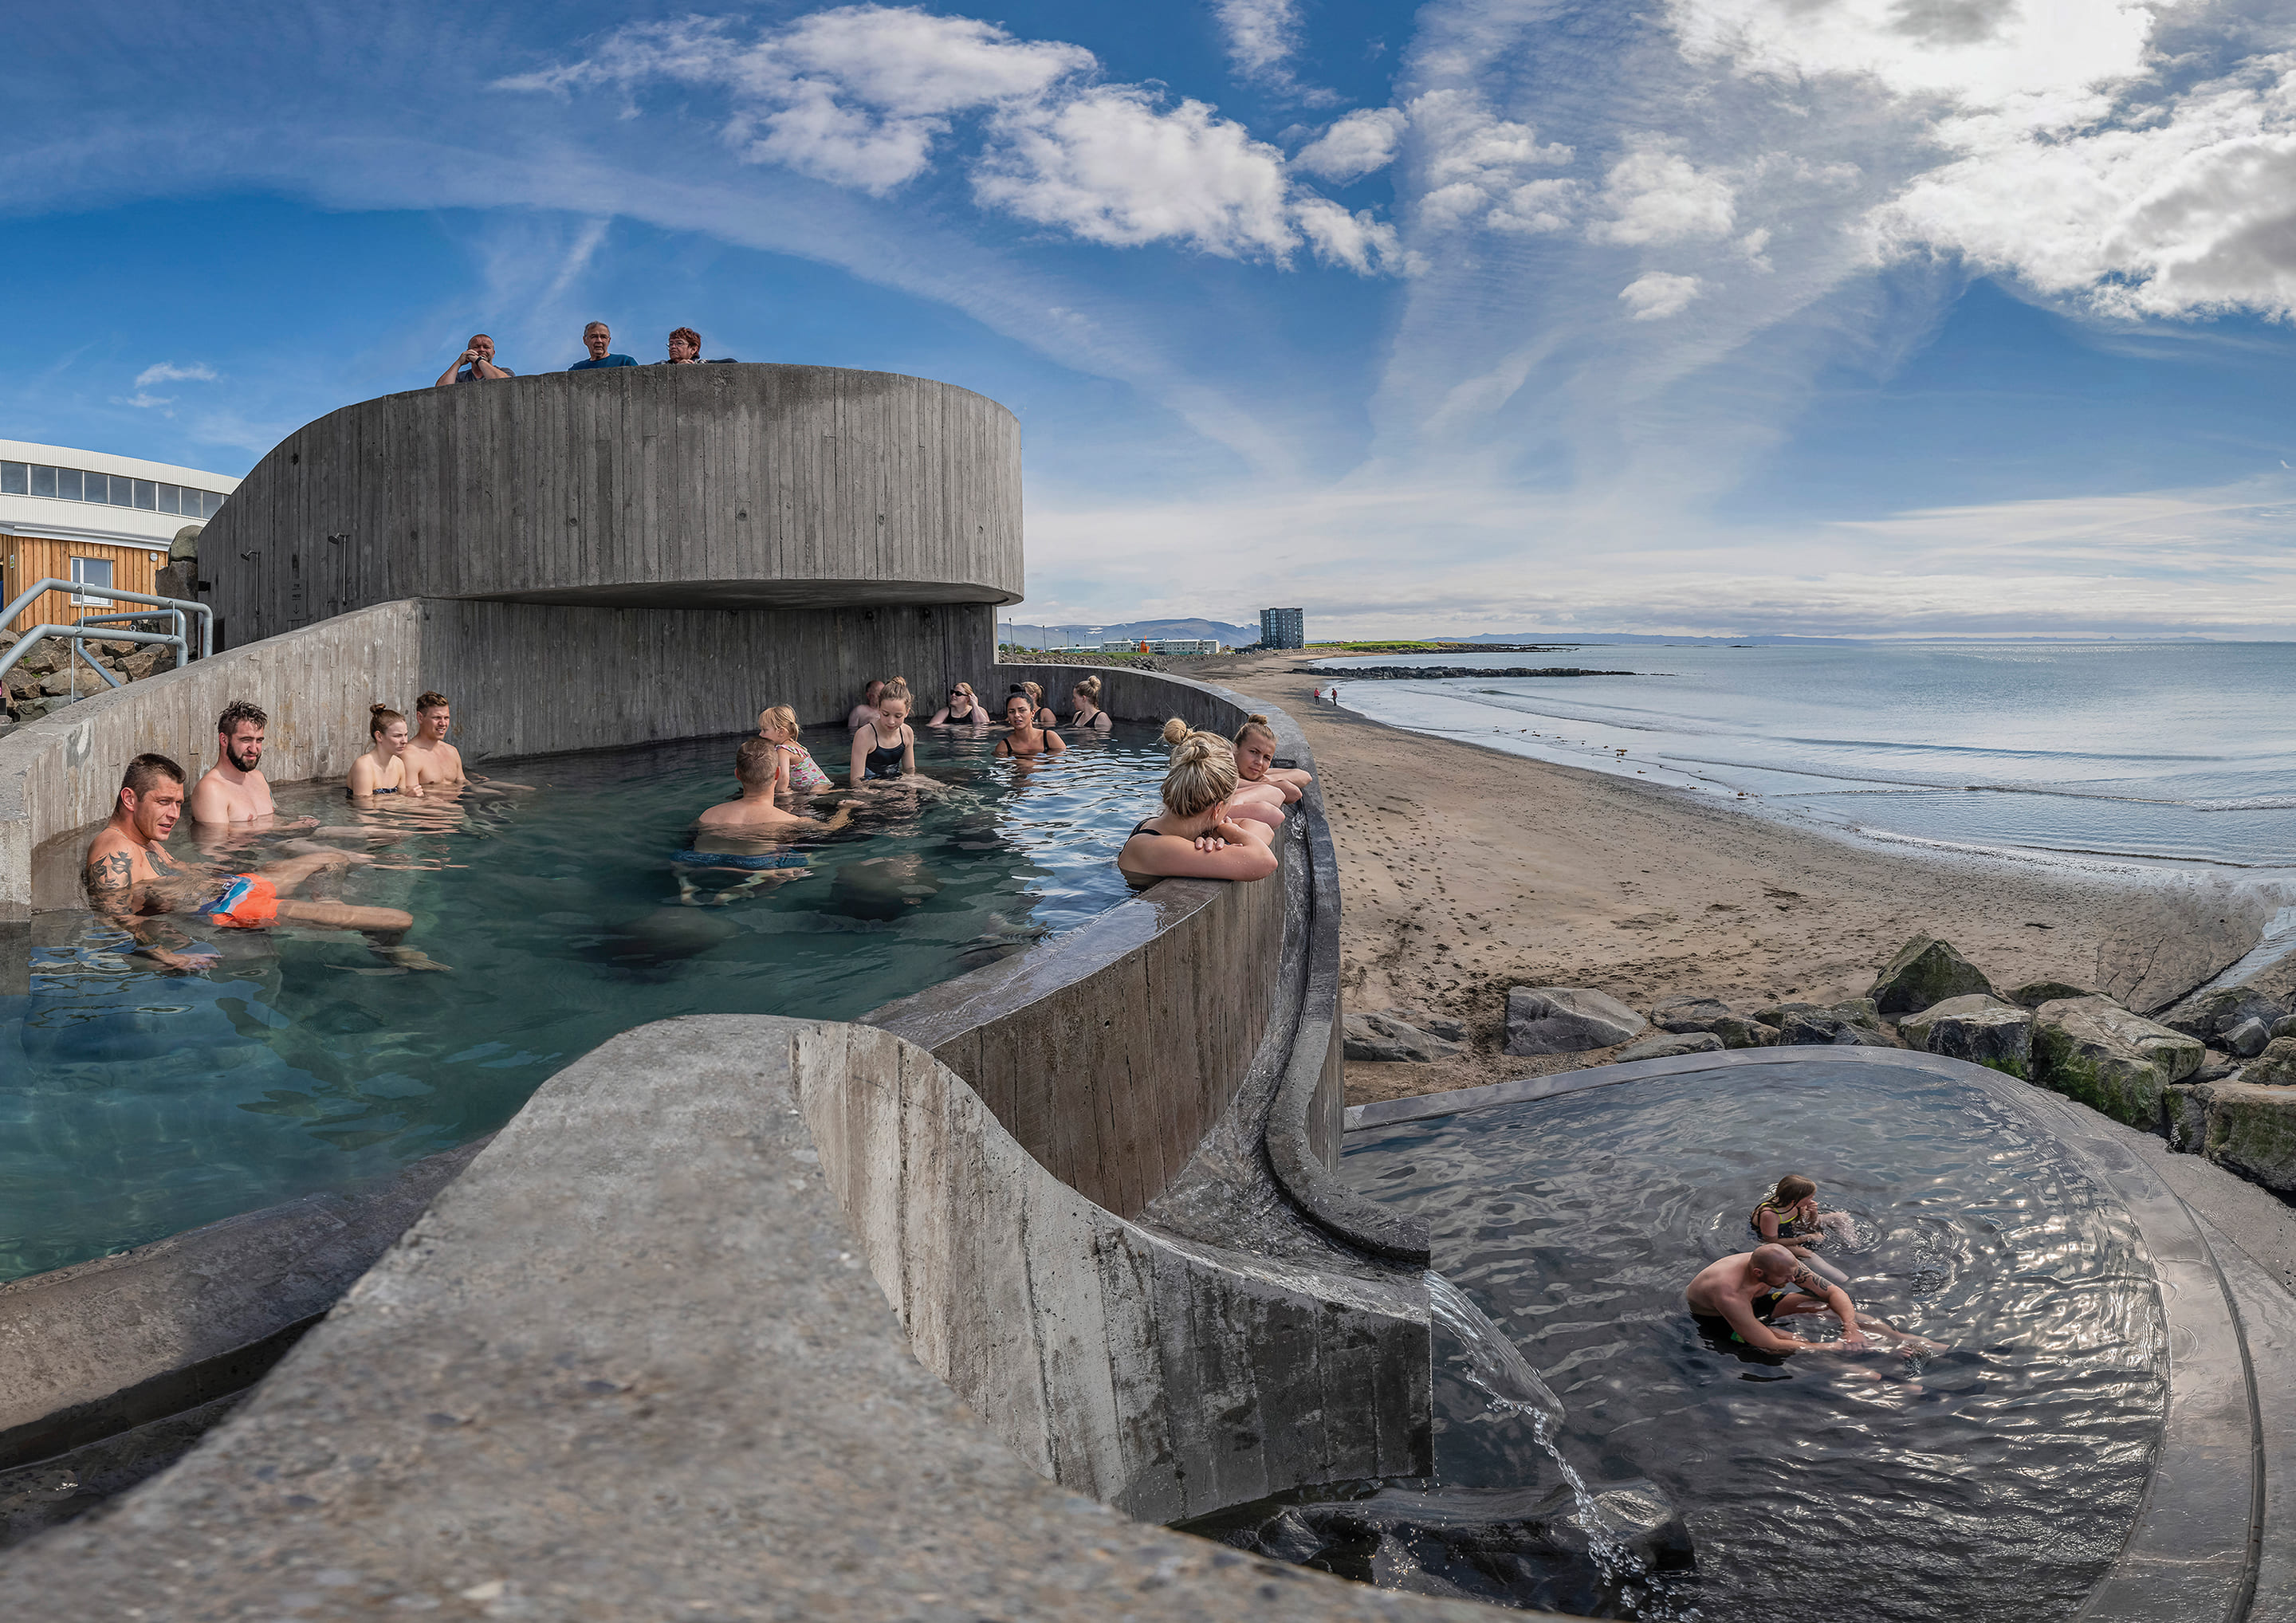 Hot Spring Pool on Iceland’s Shore Facing the North Atlantic Ocean